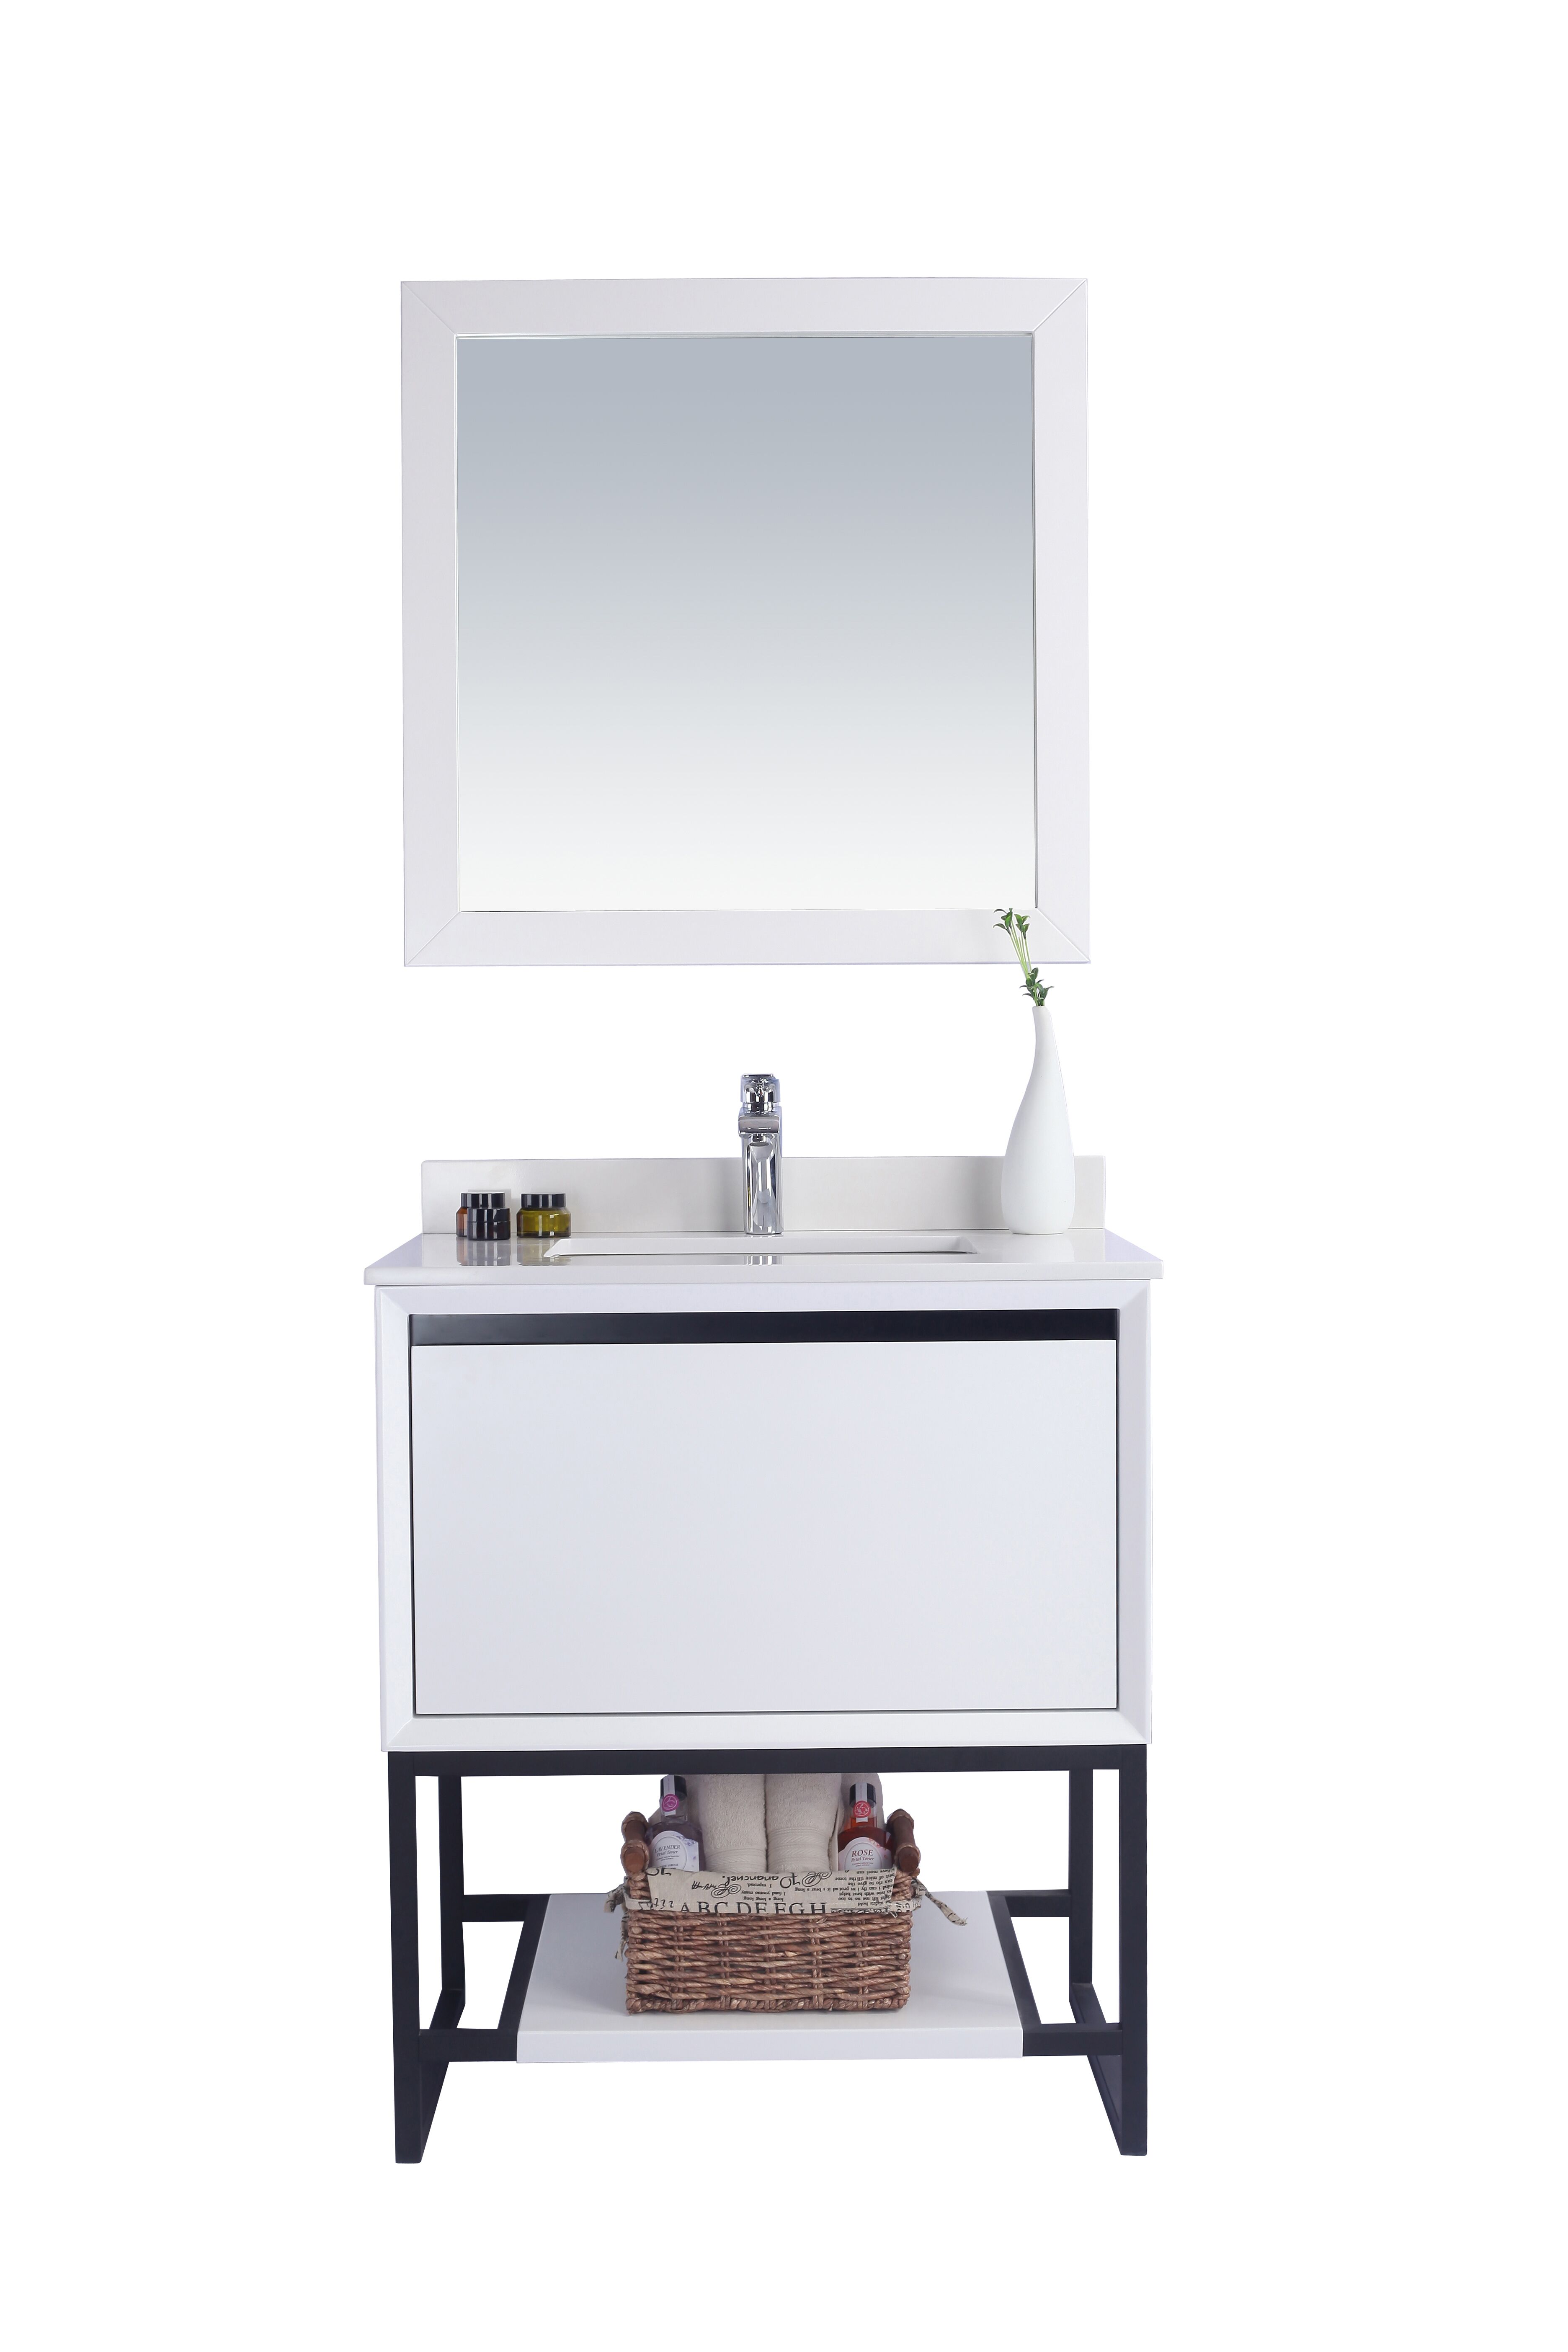 30" White Bathroom Vanity Cabinet with Top and Mirror Options